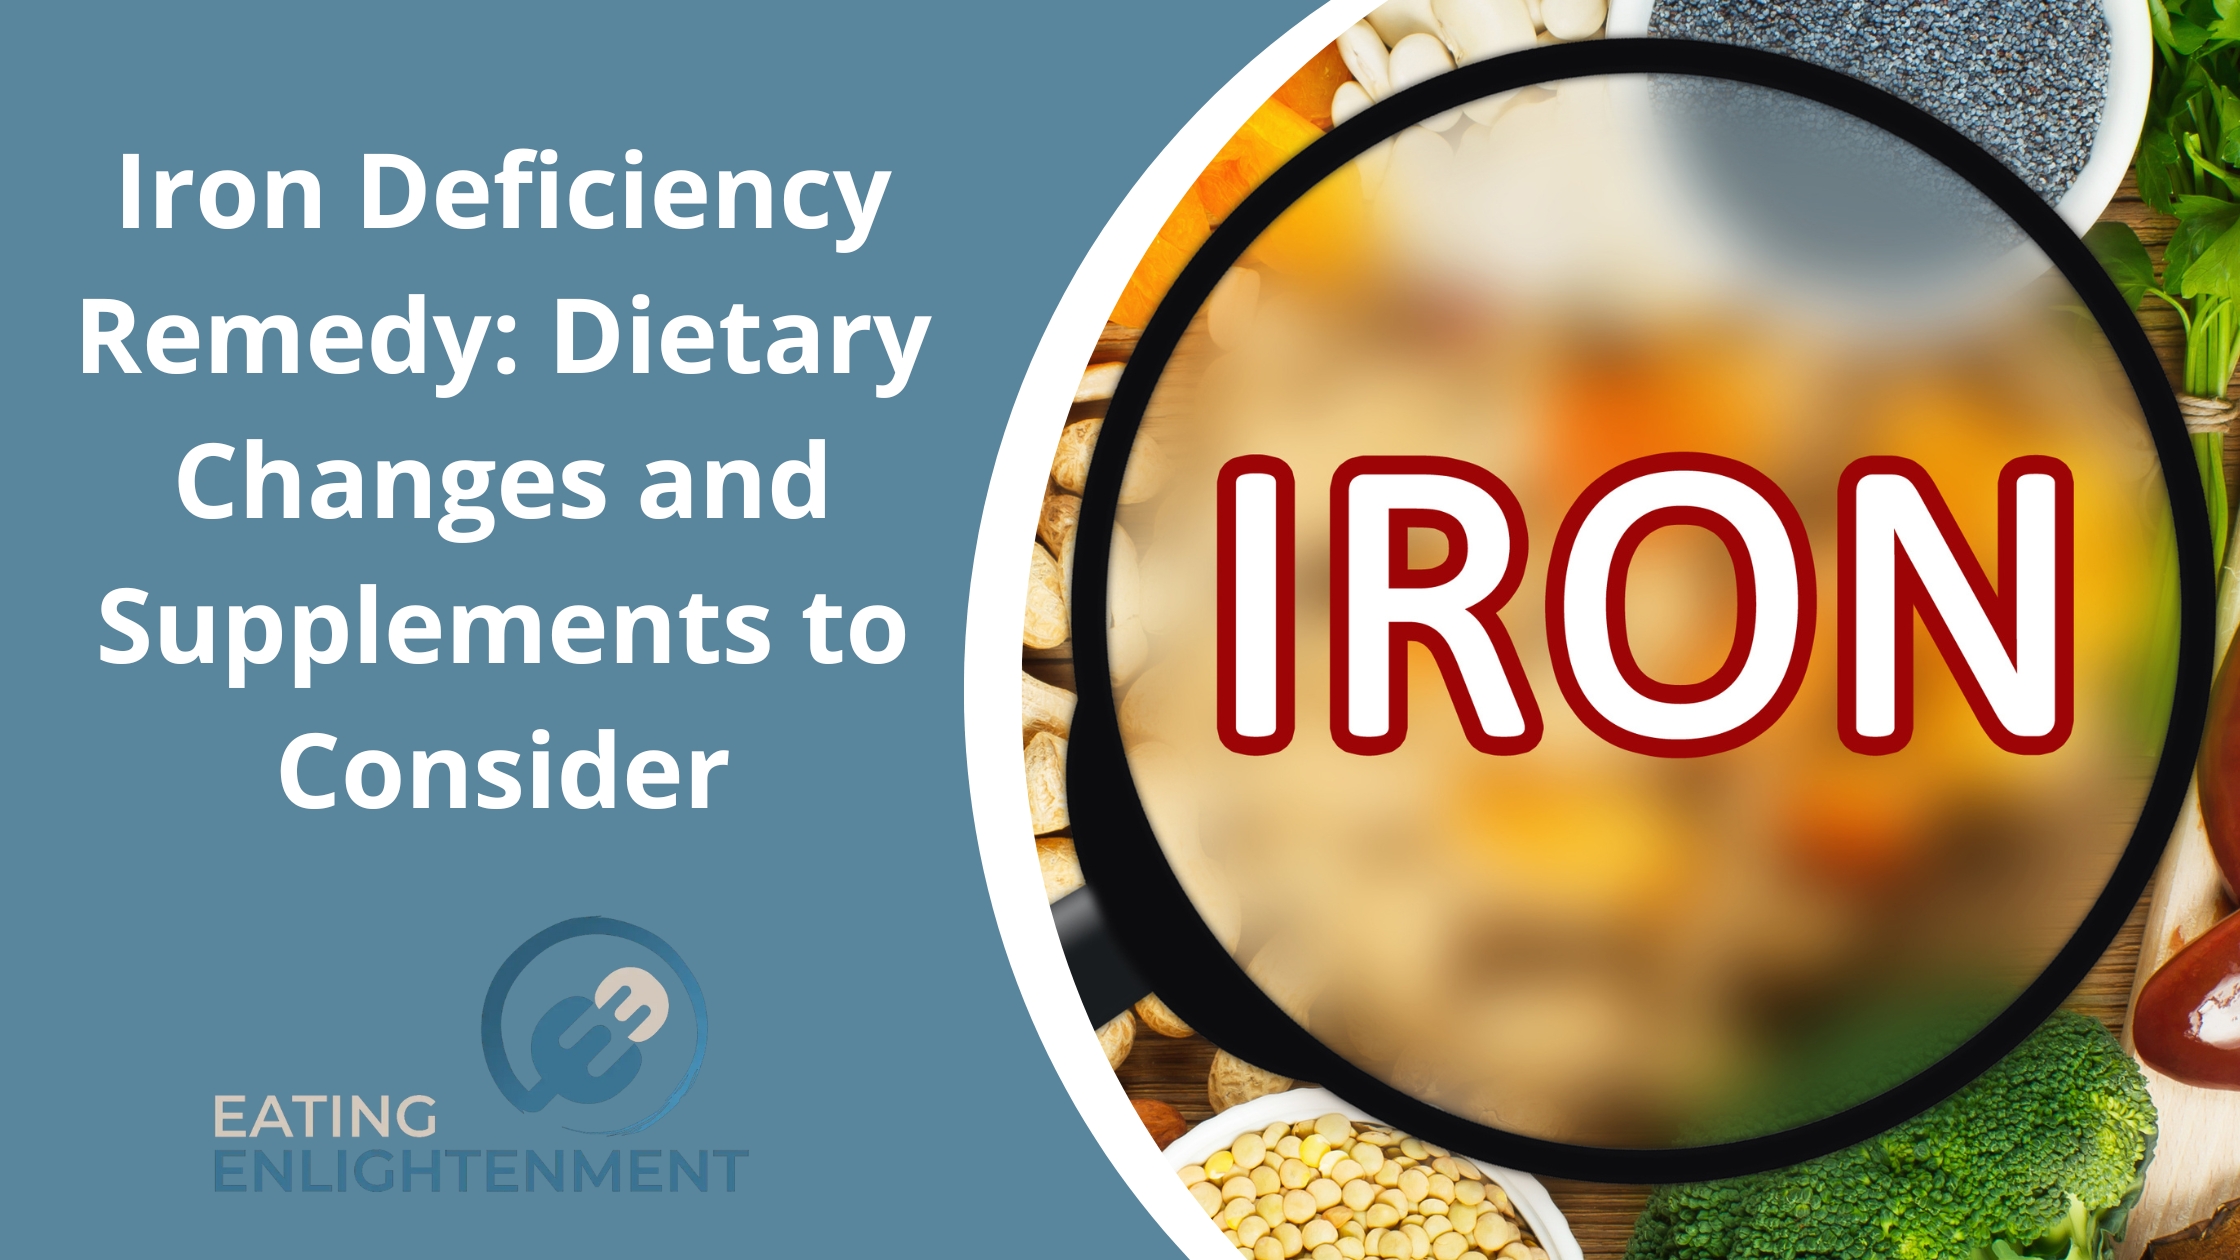 Iron Deficiency Remedy: Dietary Changes and Supplements to Consider